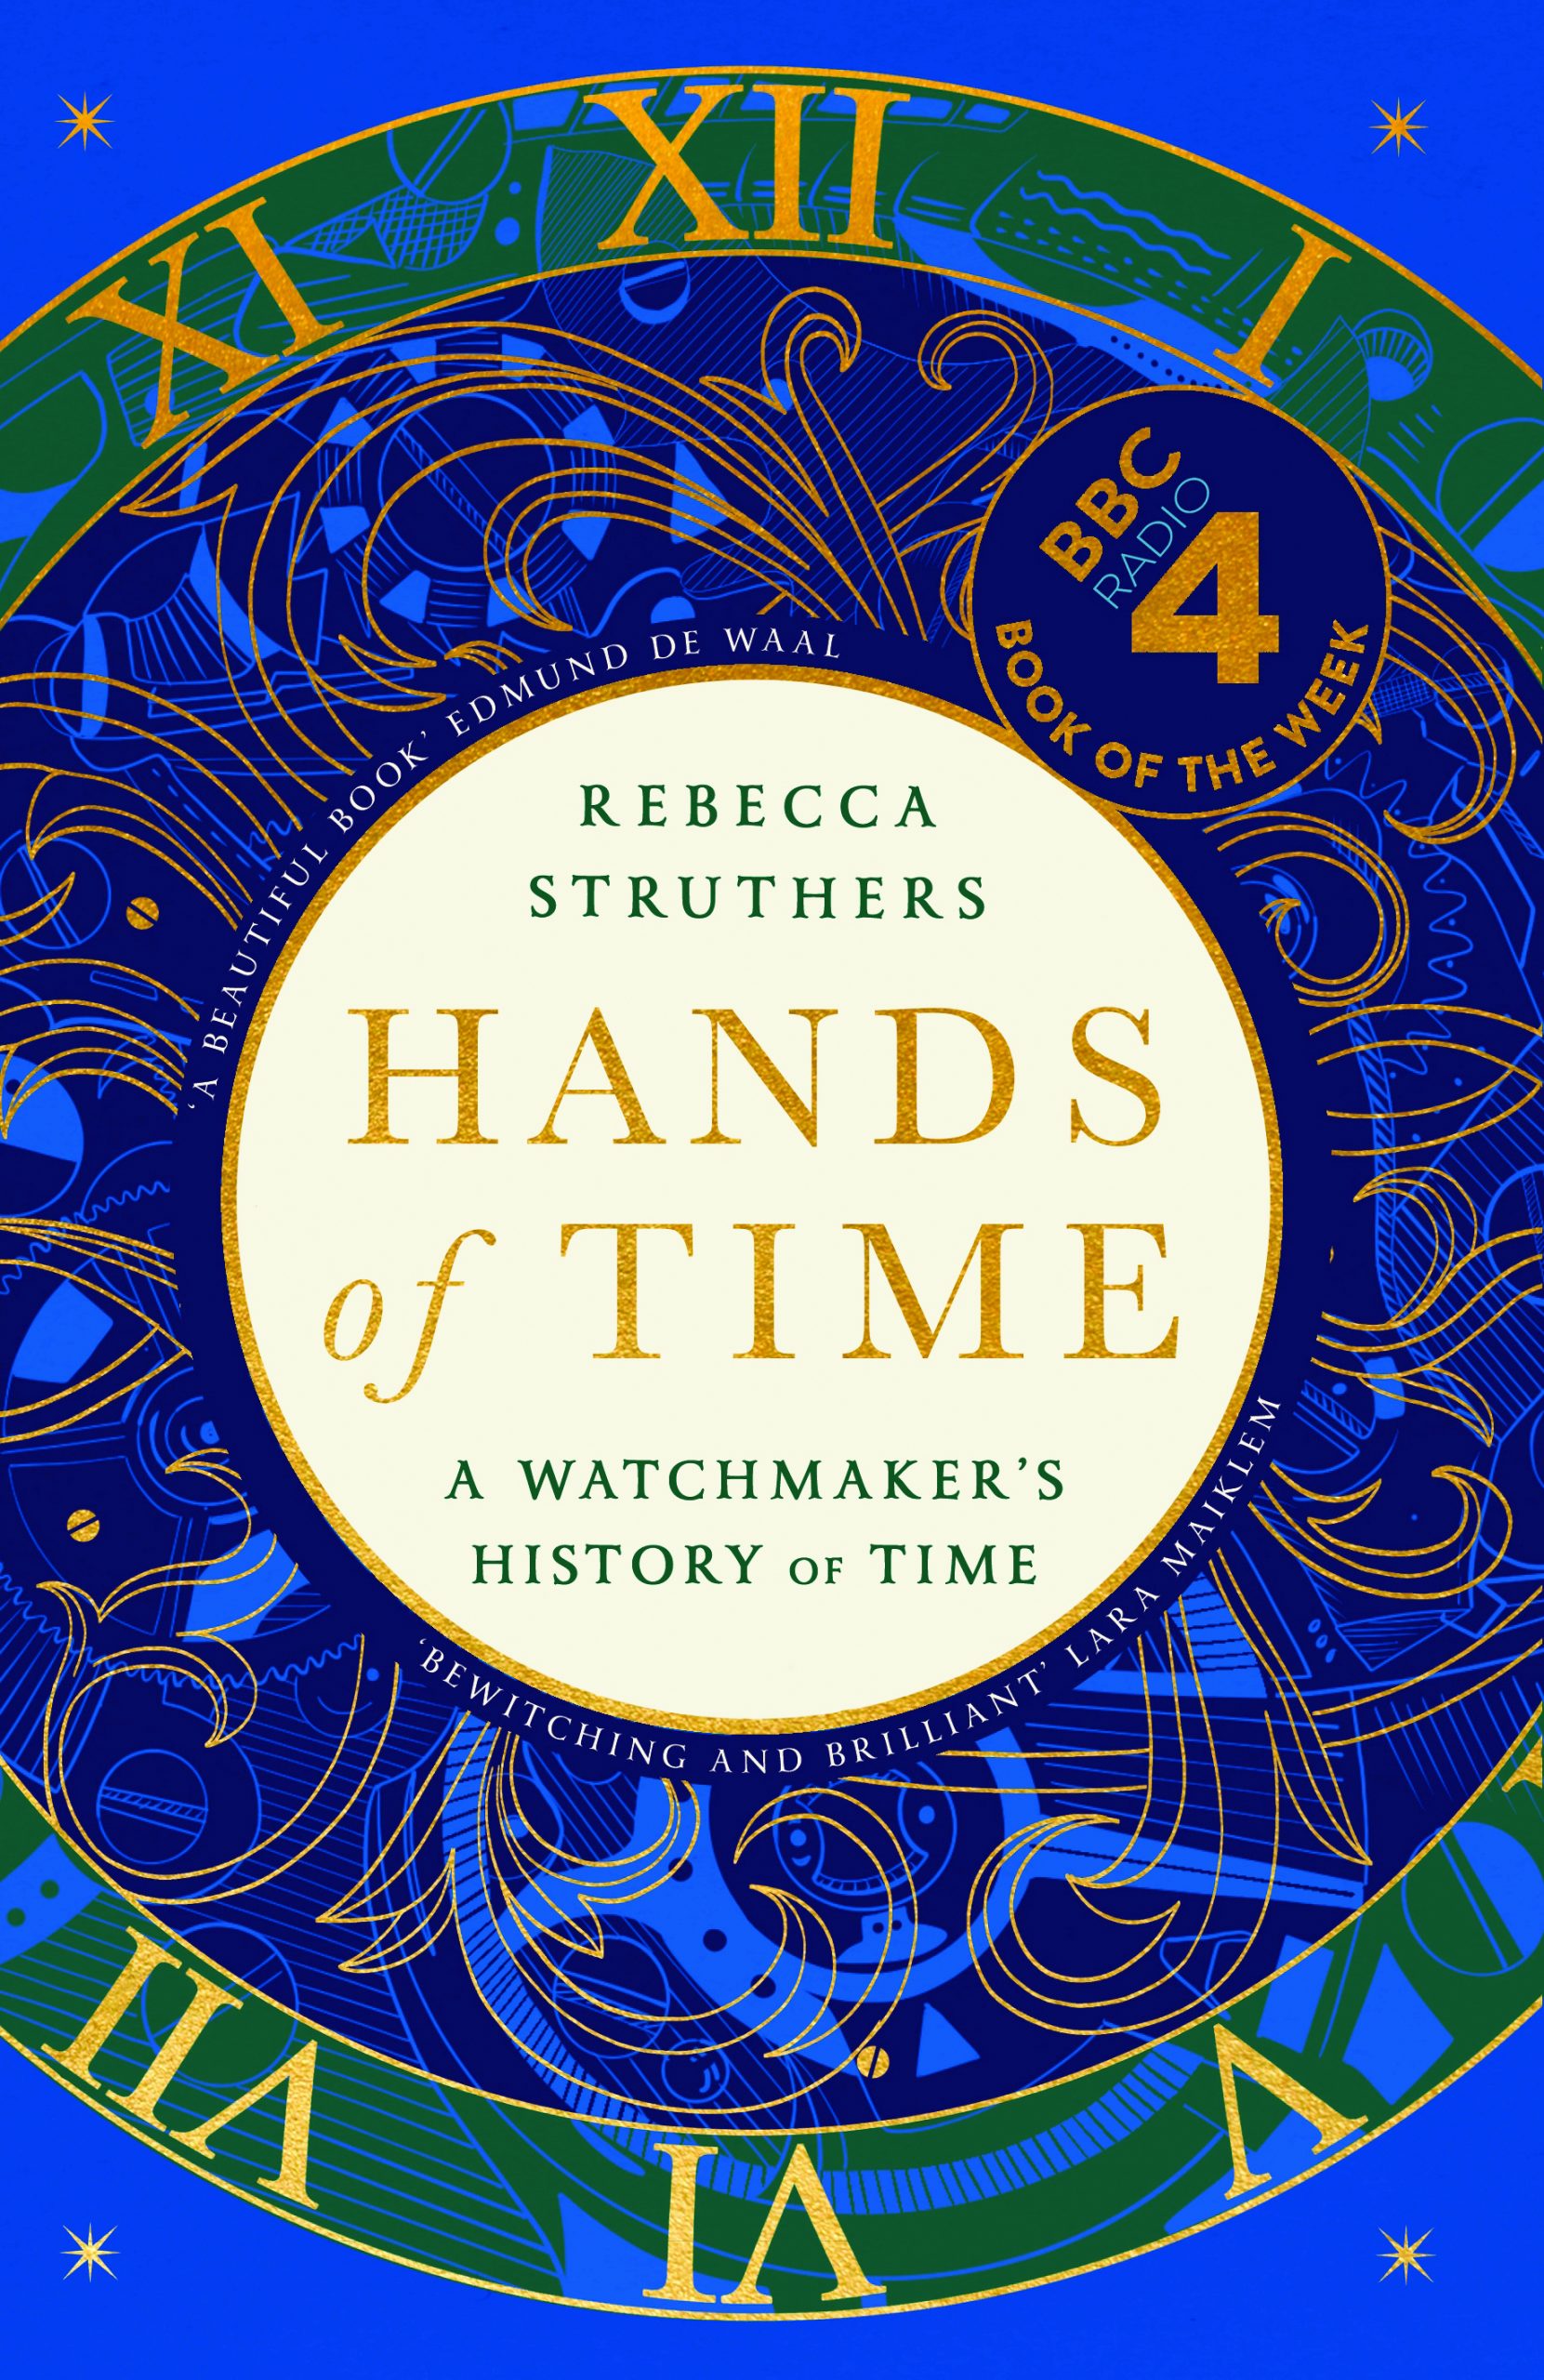 BOOK REVIEW – Hands of Time – A Watchmaker’s History of Time